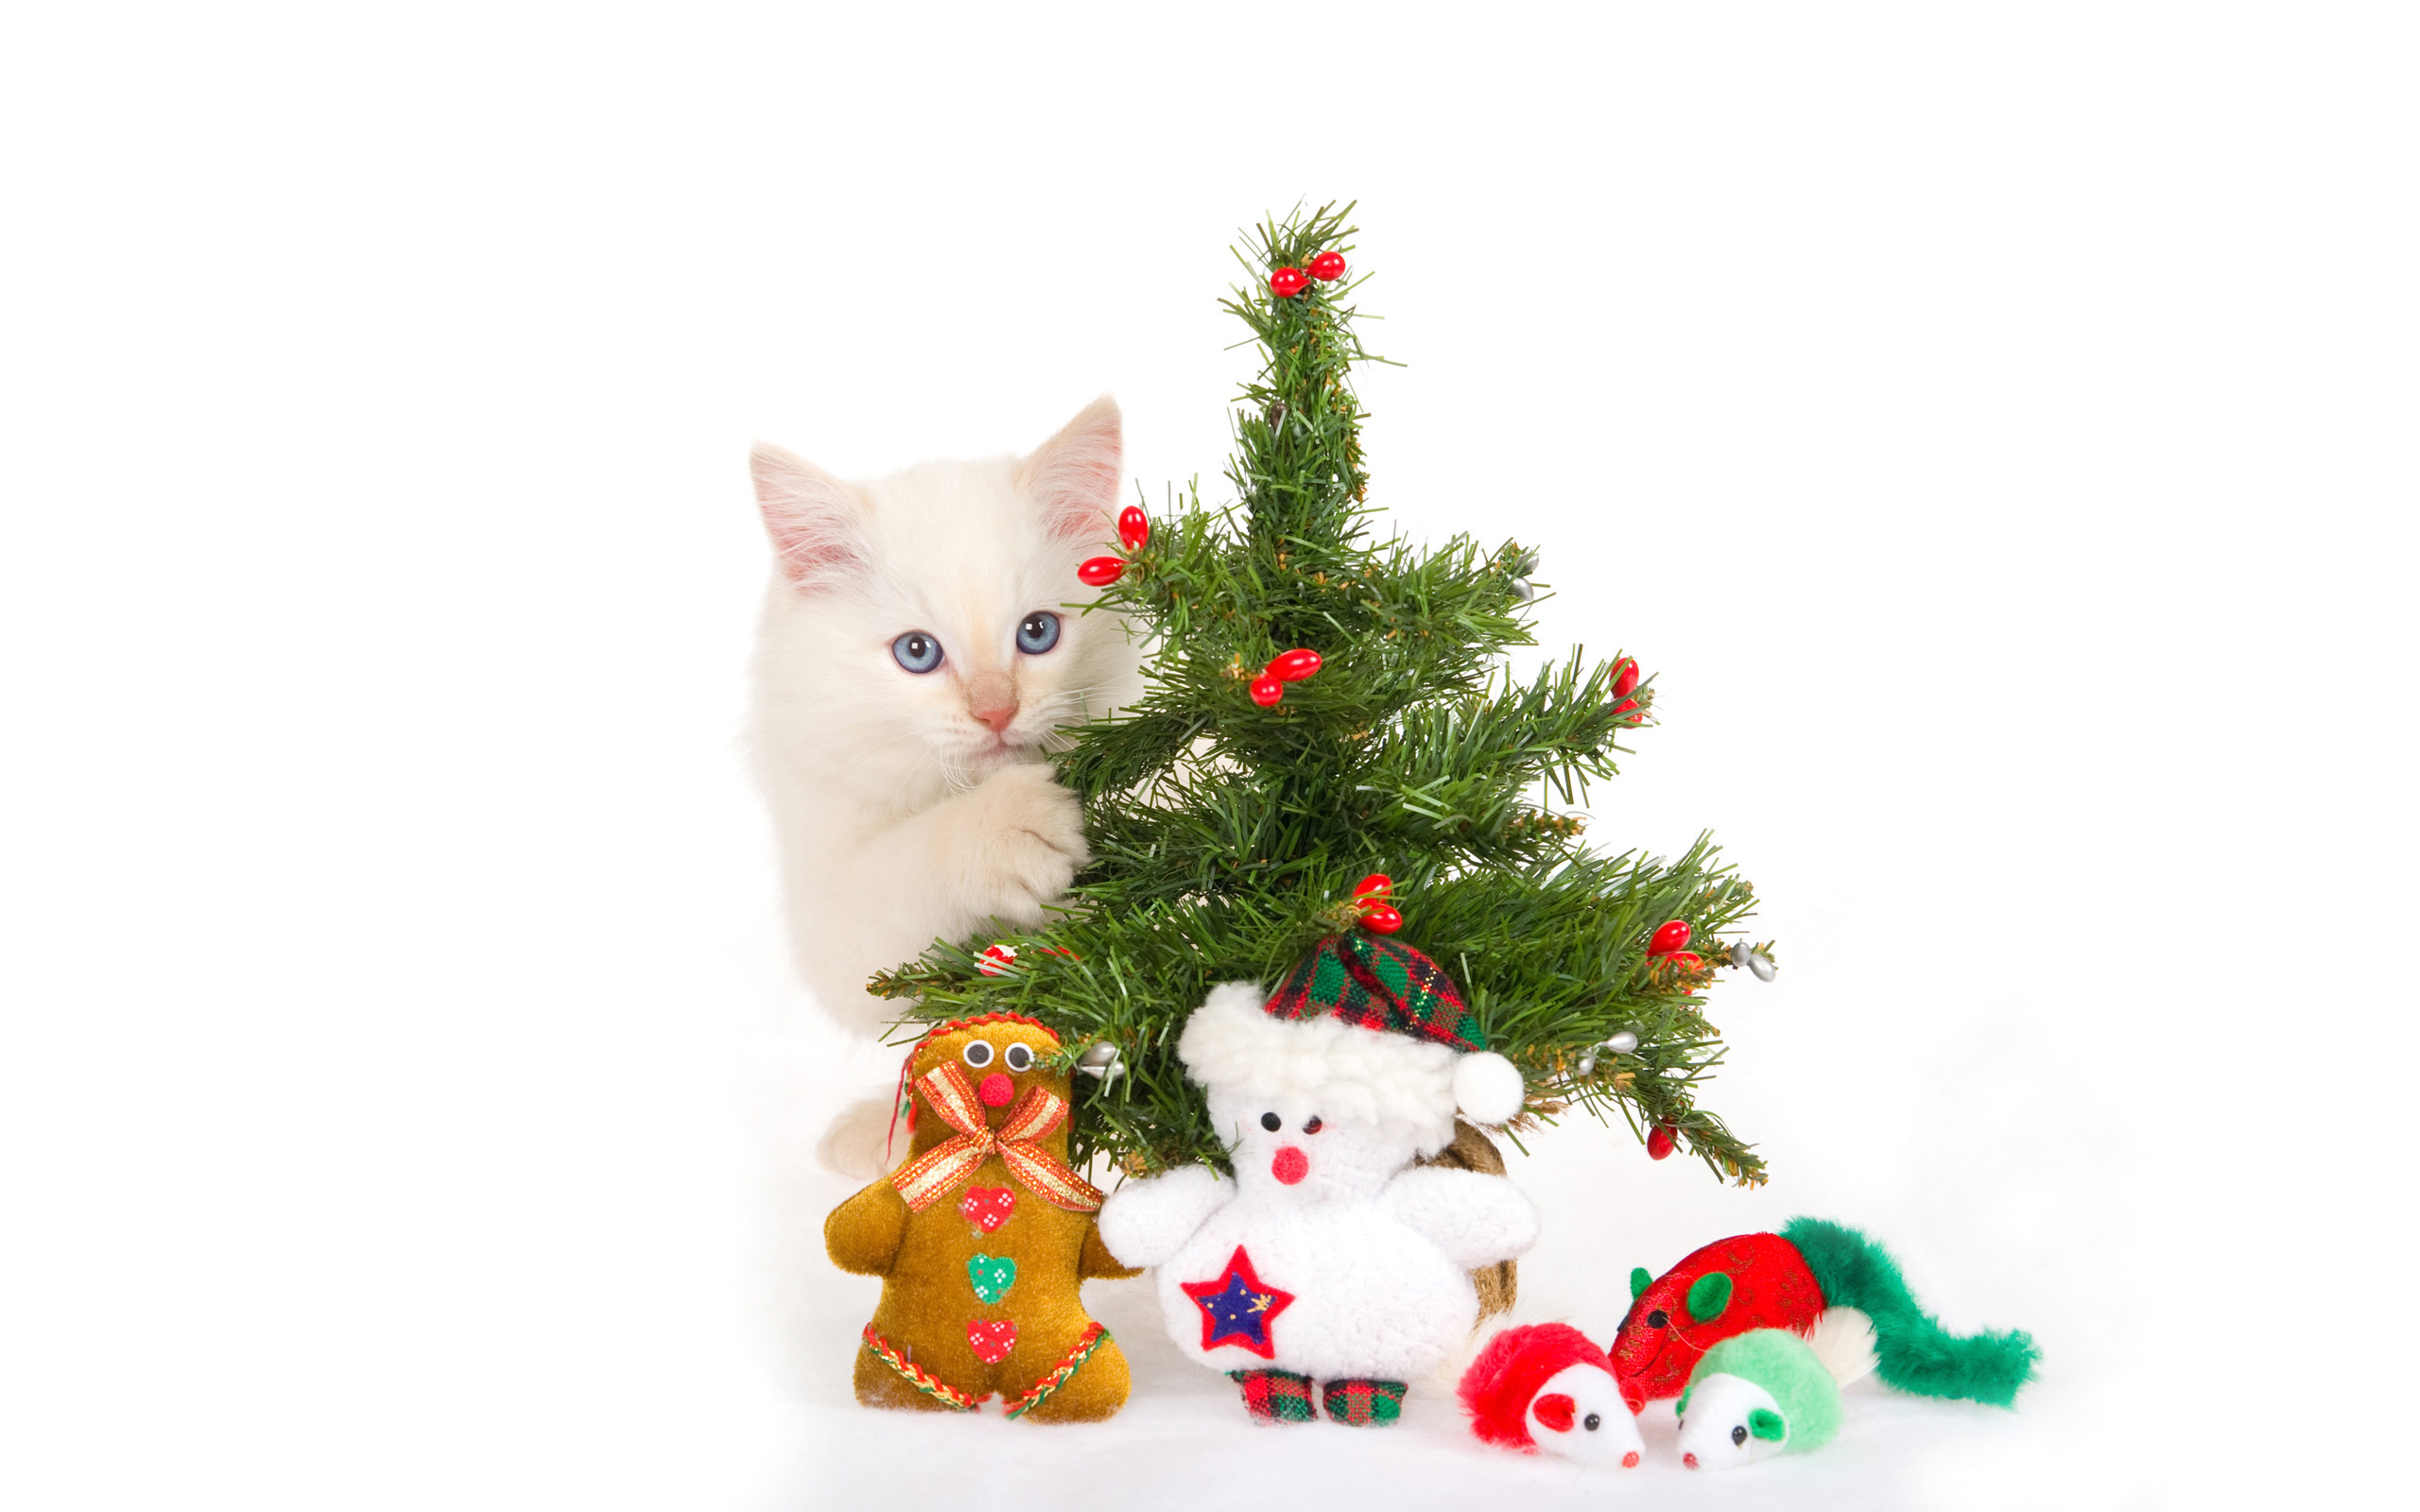 animals, holidays, cats, new year, toys, fir-trees, christmas, xmas images